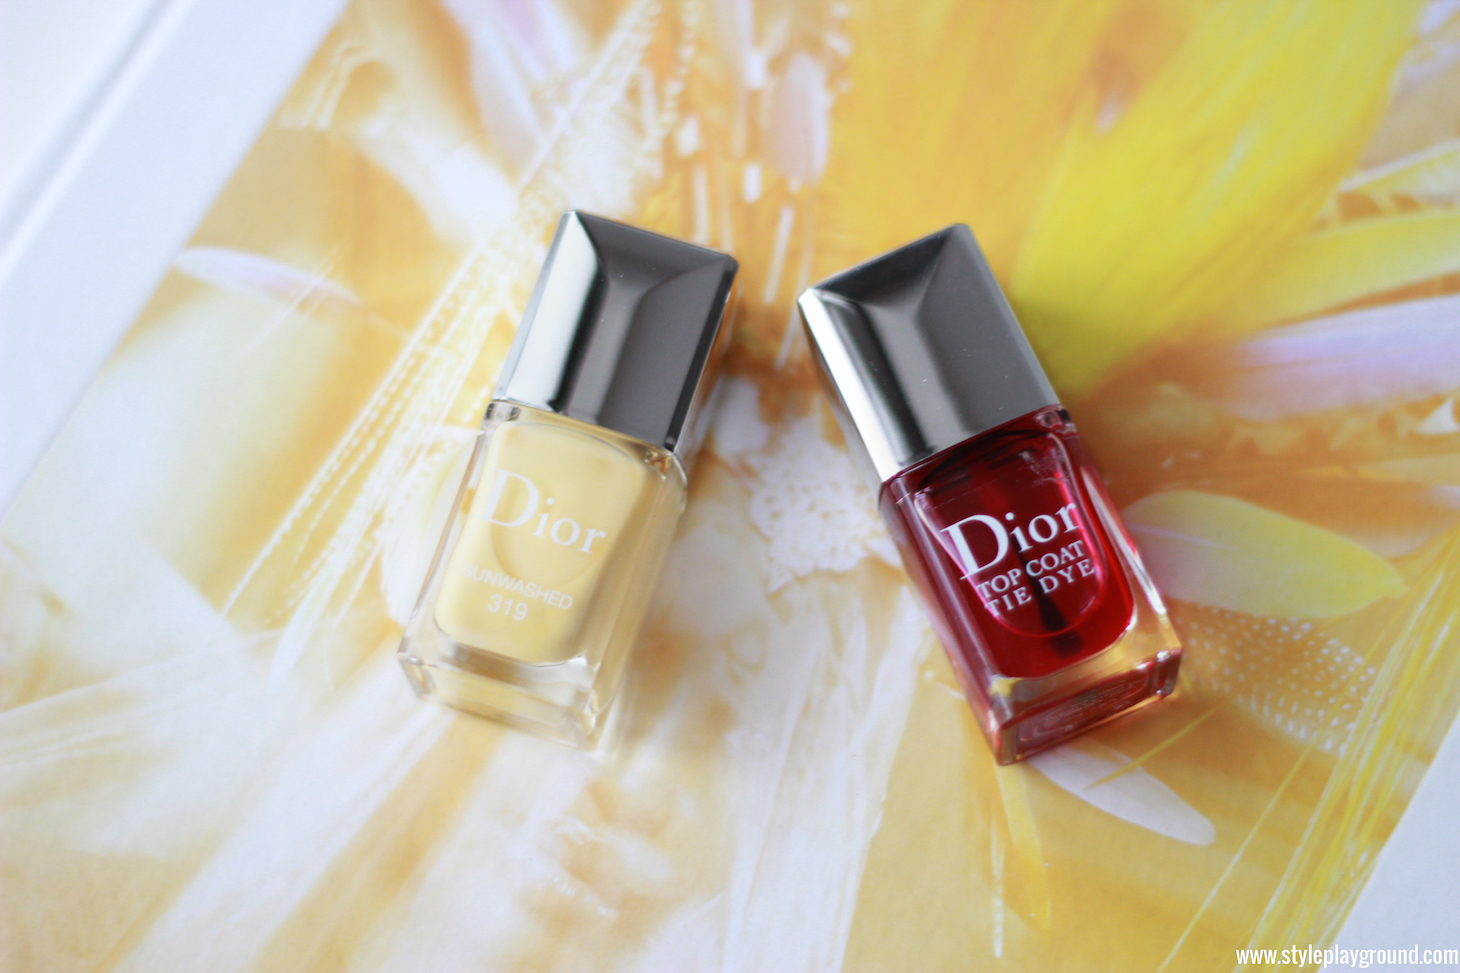 Dior Tie & dye collection